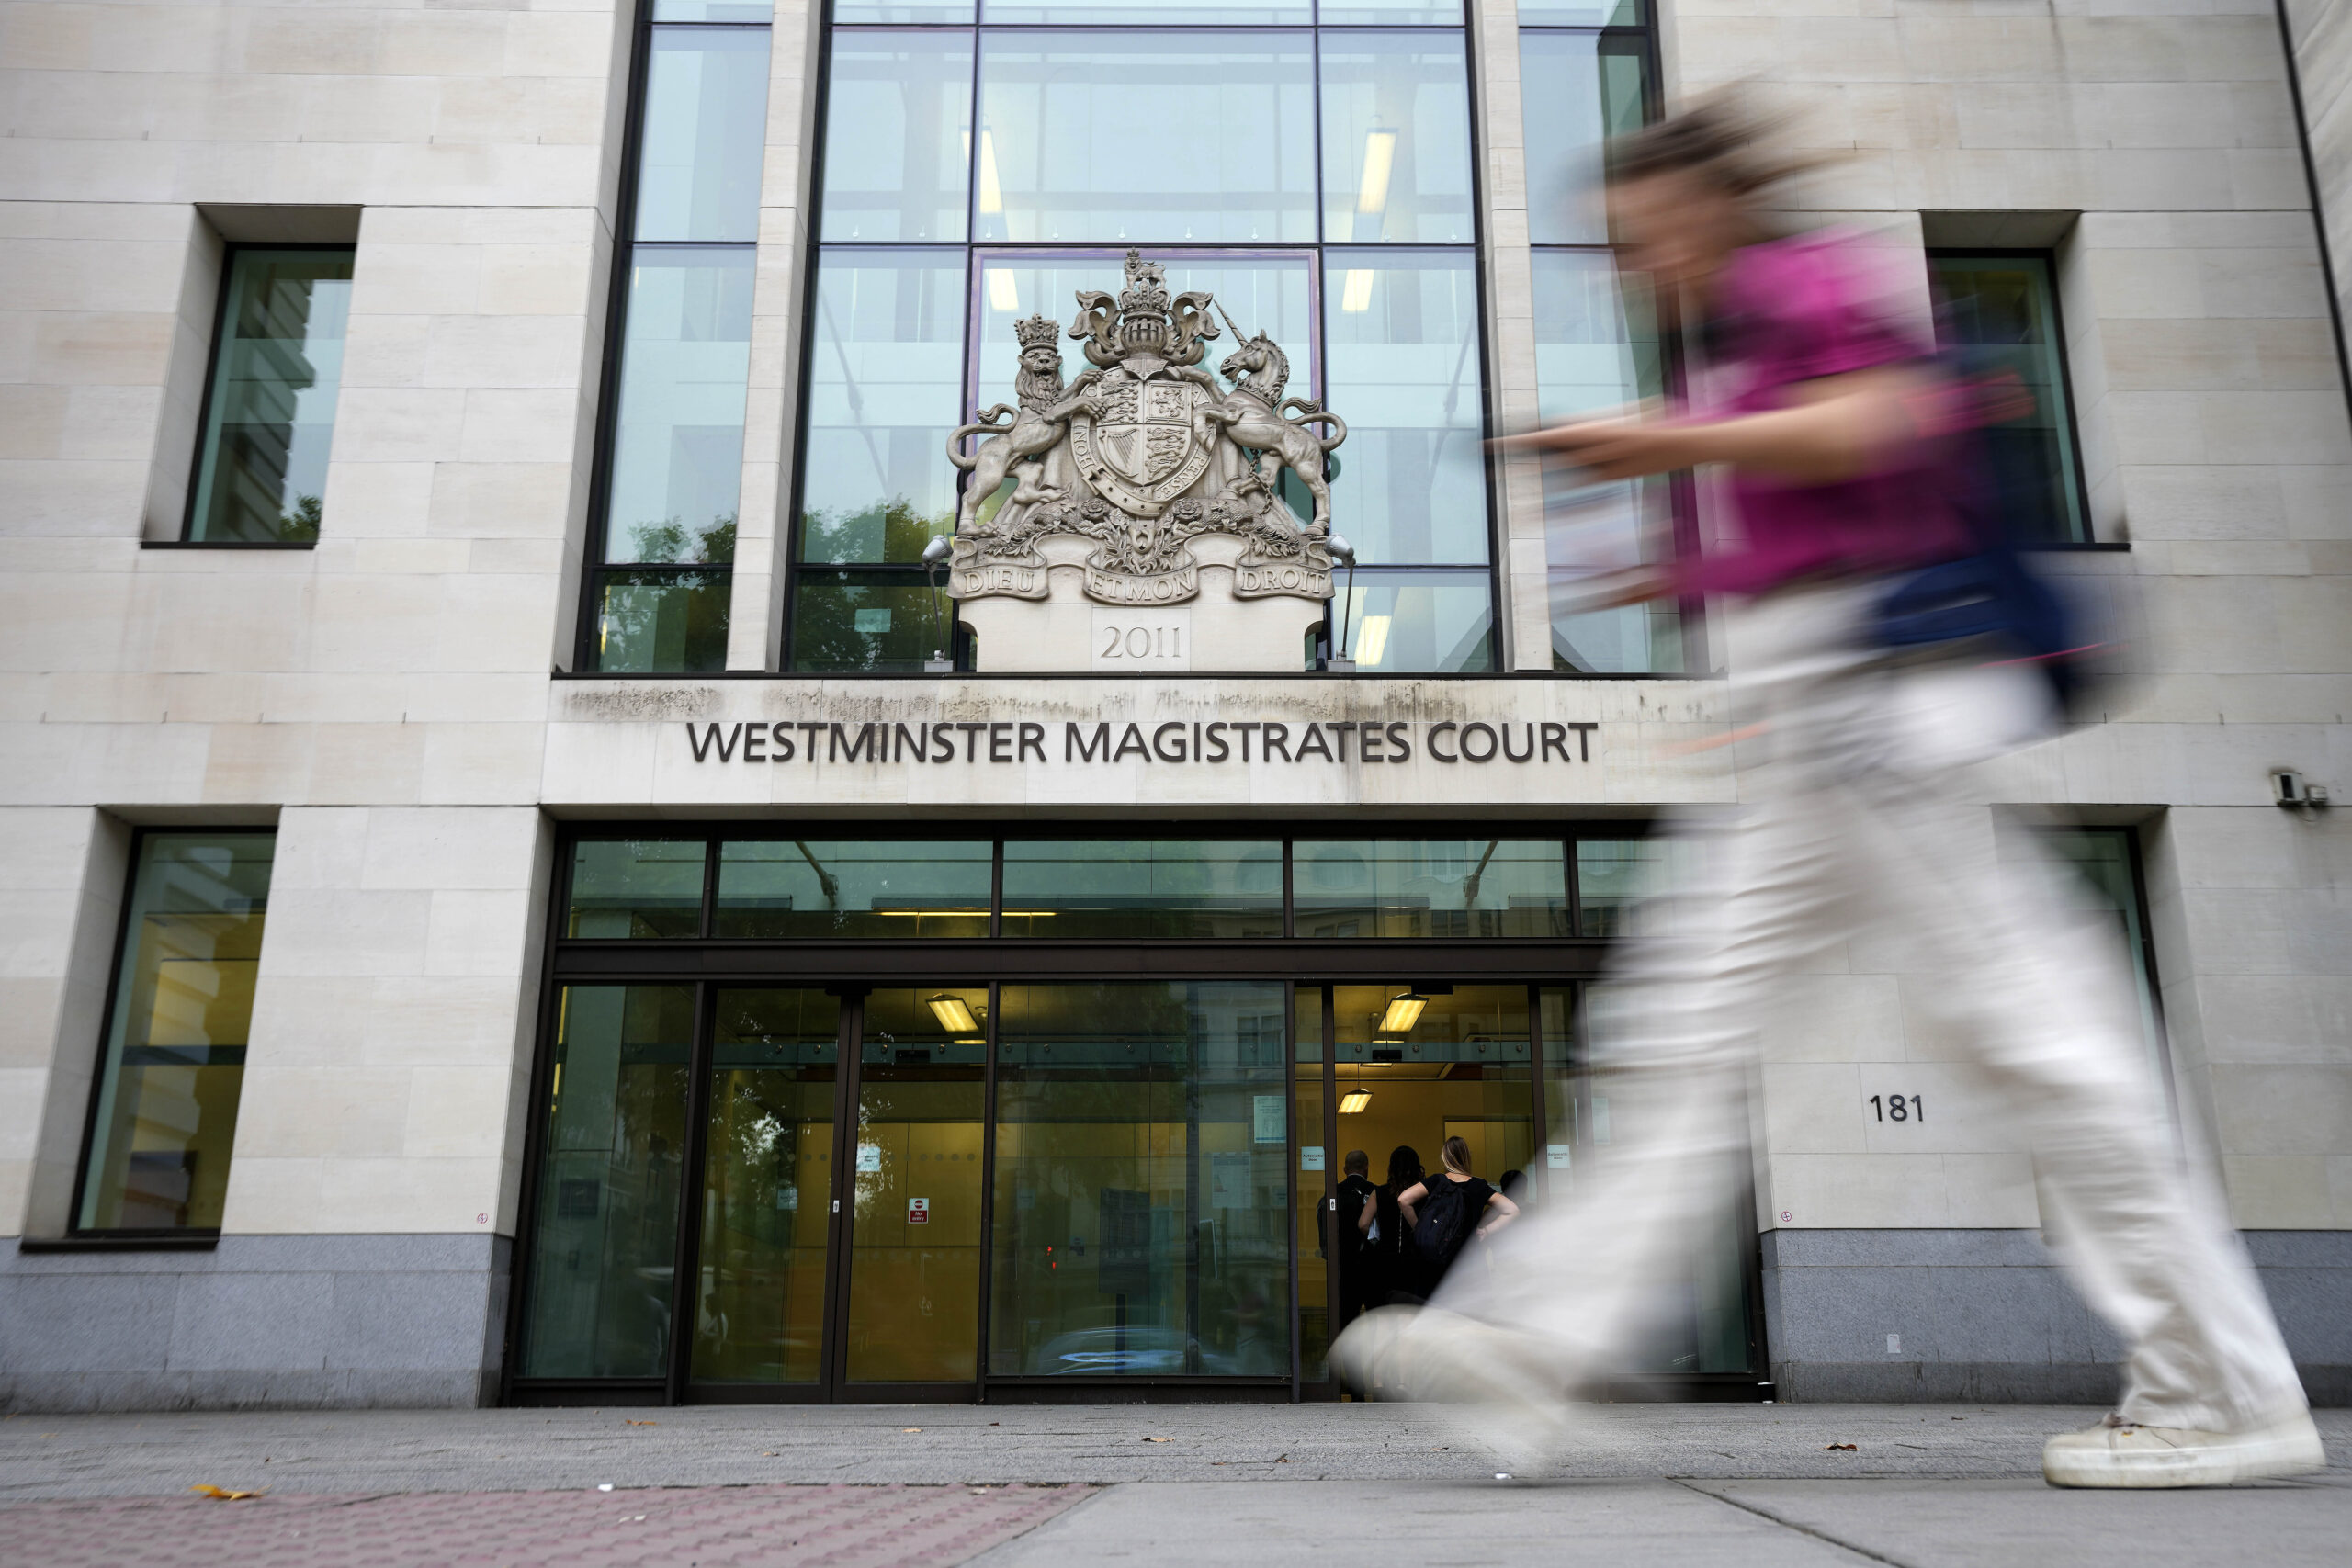 A Woman passes Westminster Magistrates Court in London, Wednesday, Aug. 17, 2022. A 20-year-old man has been charged with intending to injure or alarm The Queen under the Treason Act following an incident on Christmas Day 2021 at Windsor Castle. Jaswant Singh Chail was charged with an offence under section two of the Treason Act 1842 - last used more than 40 years ago - which is 'discharging or aiming firearms, or throwing or using any offensive matter or weapon, with intent to injure or alarm Her Majesty'. (AP Photo/Frank Augstein)